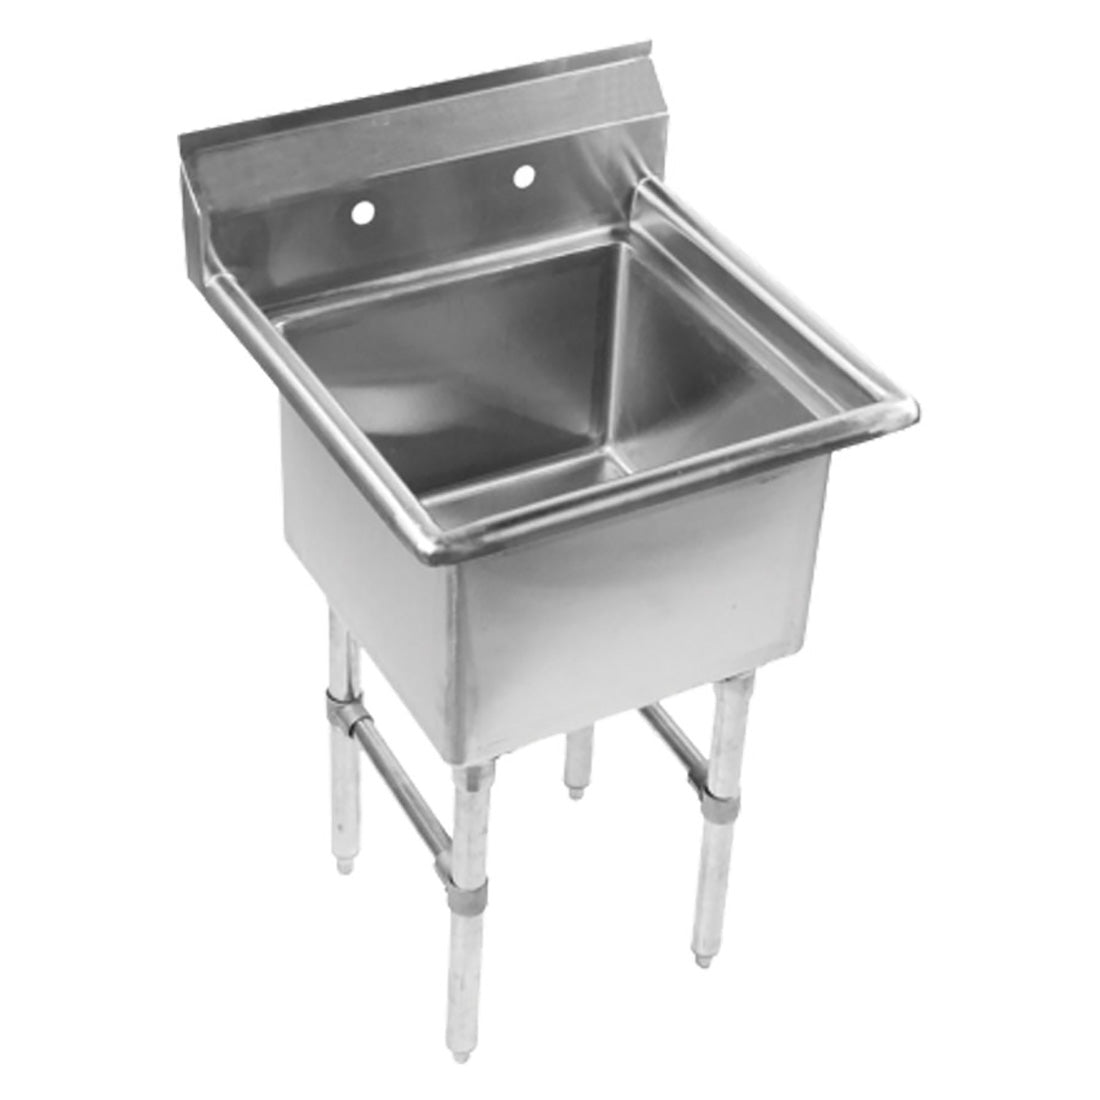 SKBEN01-1818N Stainless Steel Sink with Basin - Cafe Supply